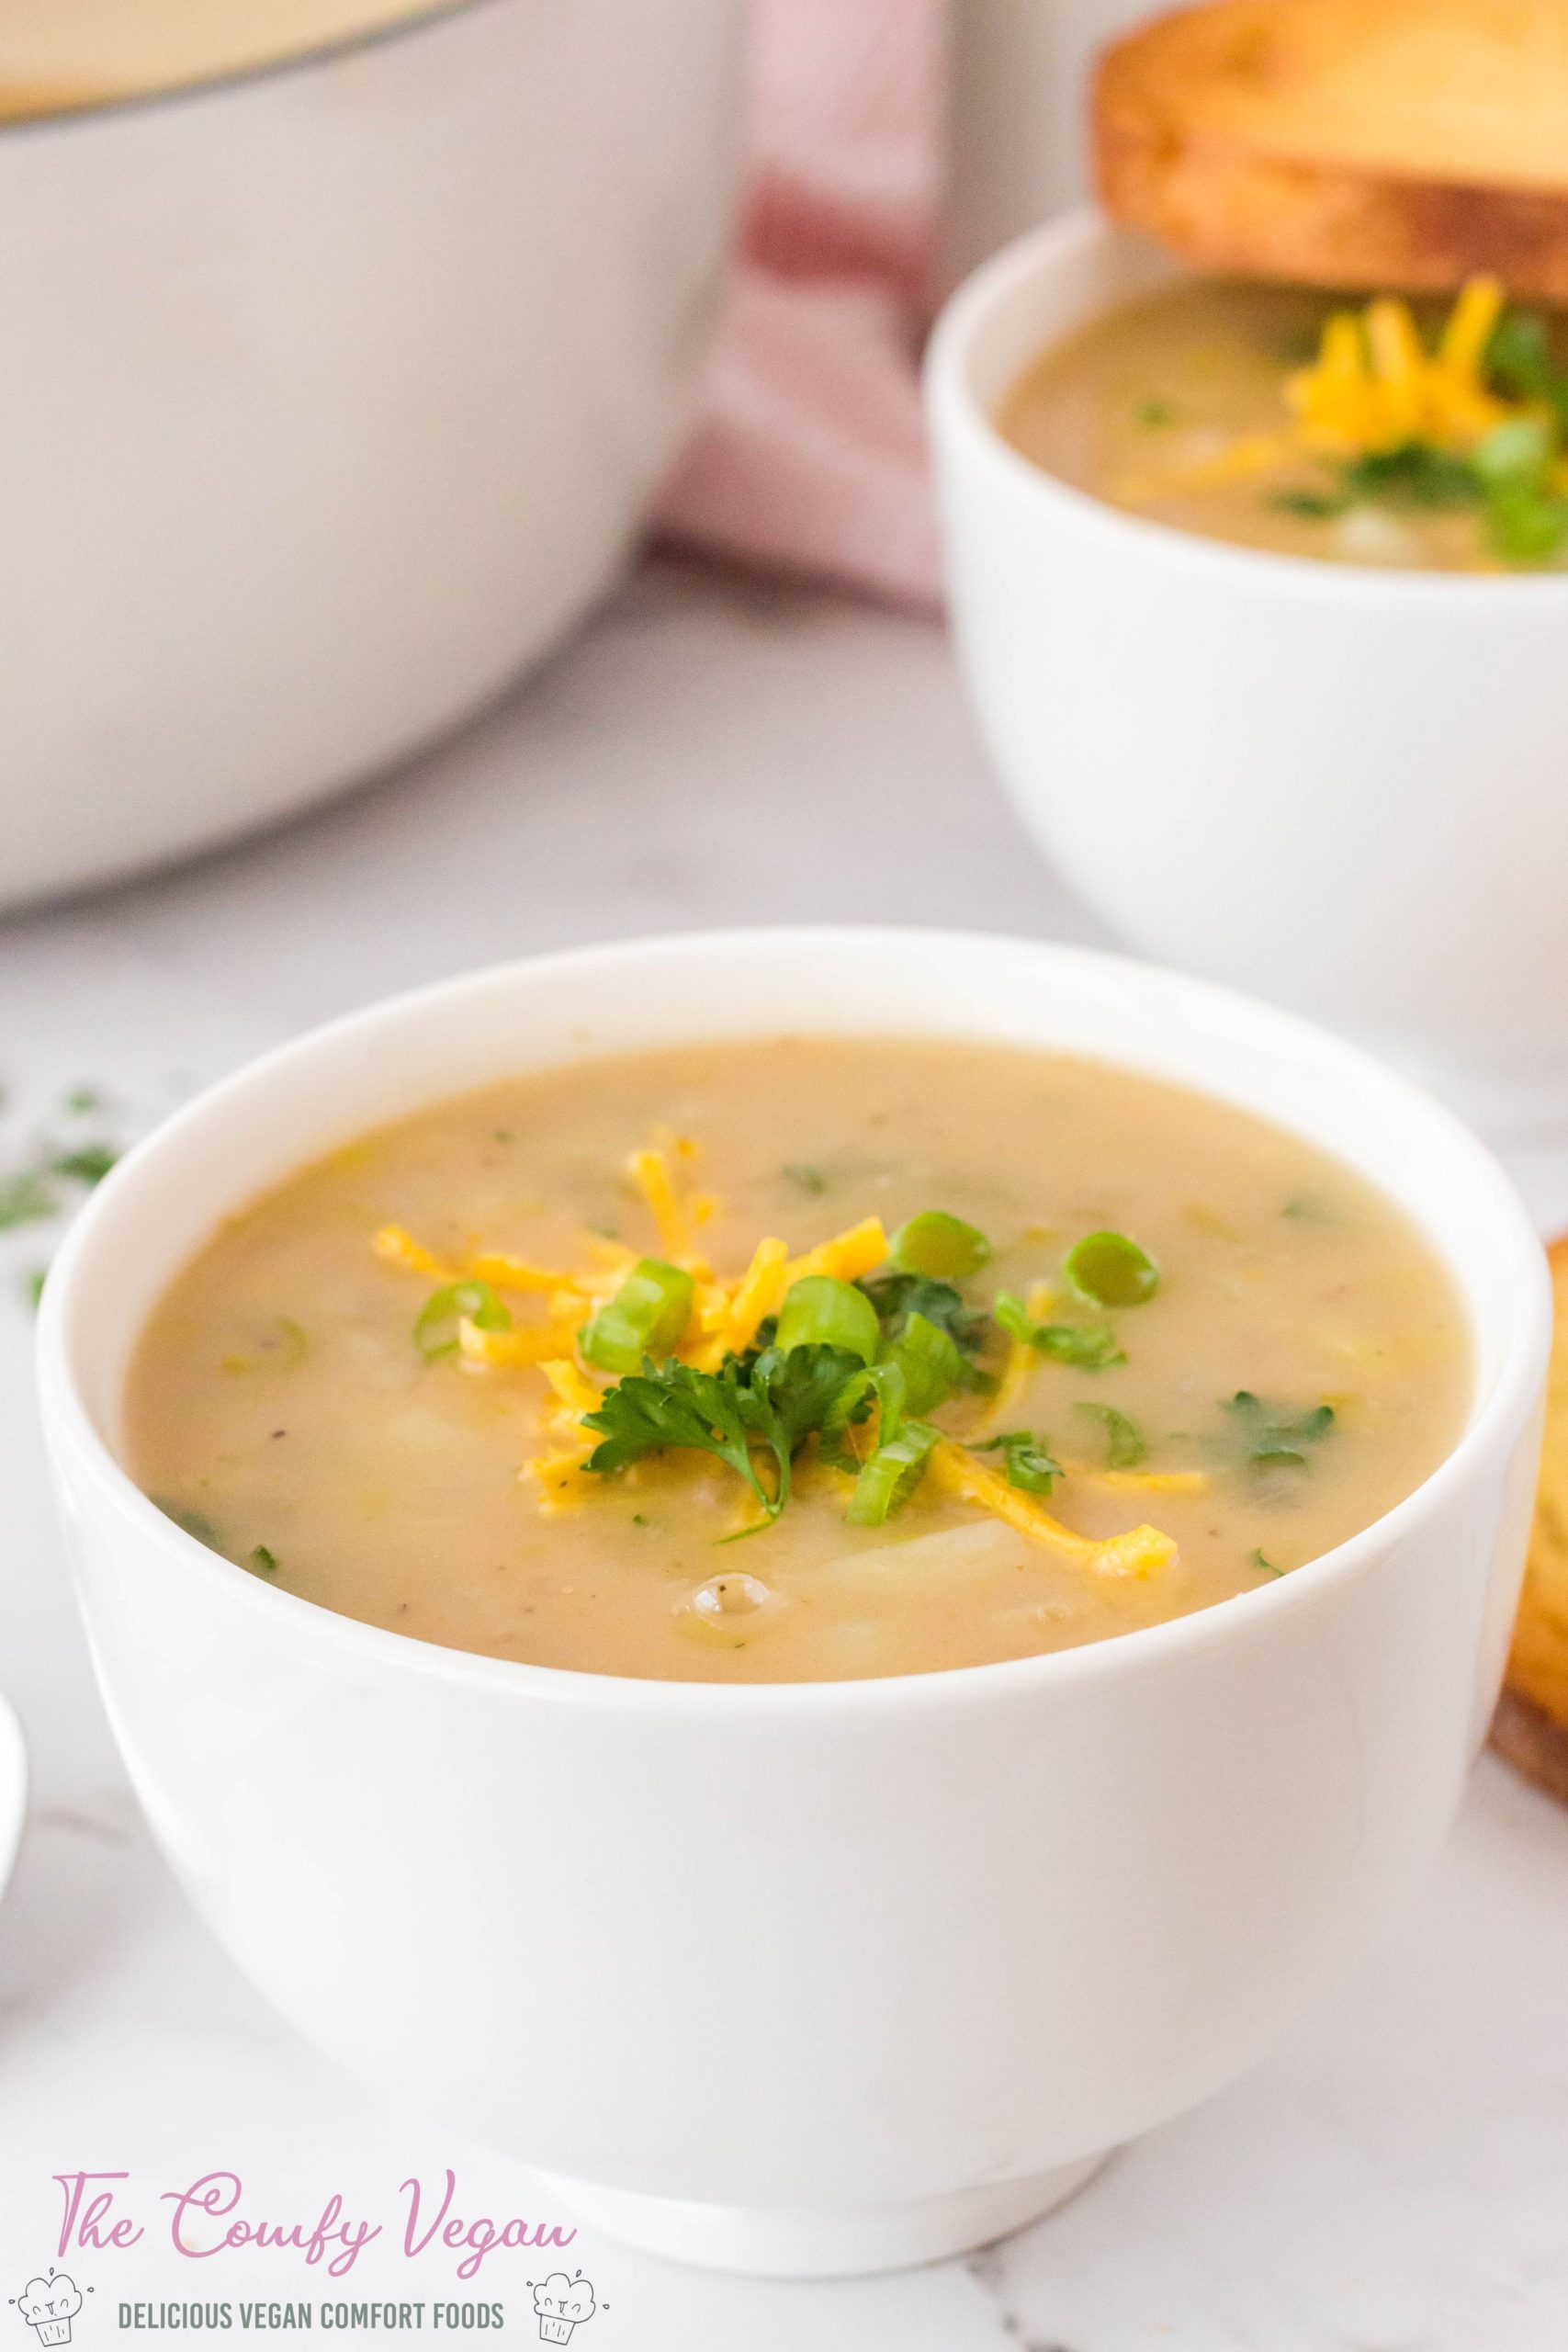 This Vegan Potato Leek Soup is the ultimate comfort food in a bowl. This soup is thick, creamy, full of flavor and so easy to make. Made with potatoes, leeks, onions, and a thick and creamy veggie broth it feeds a crowd that everyone will love.